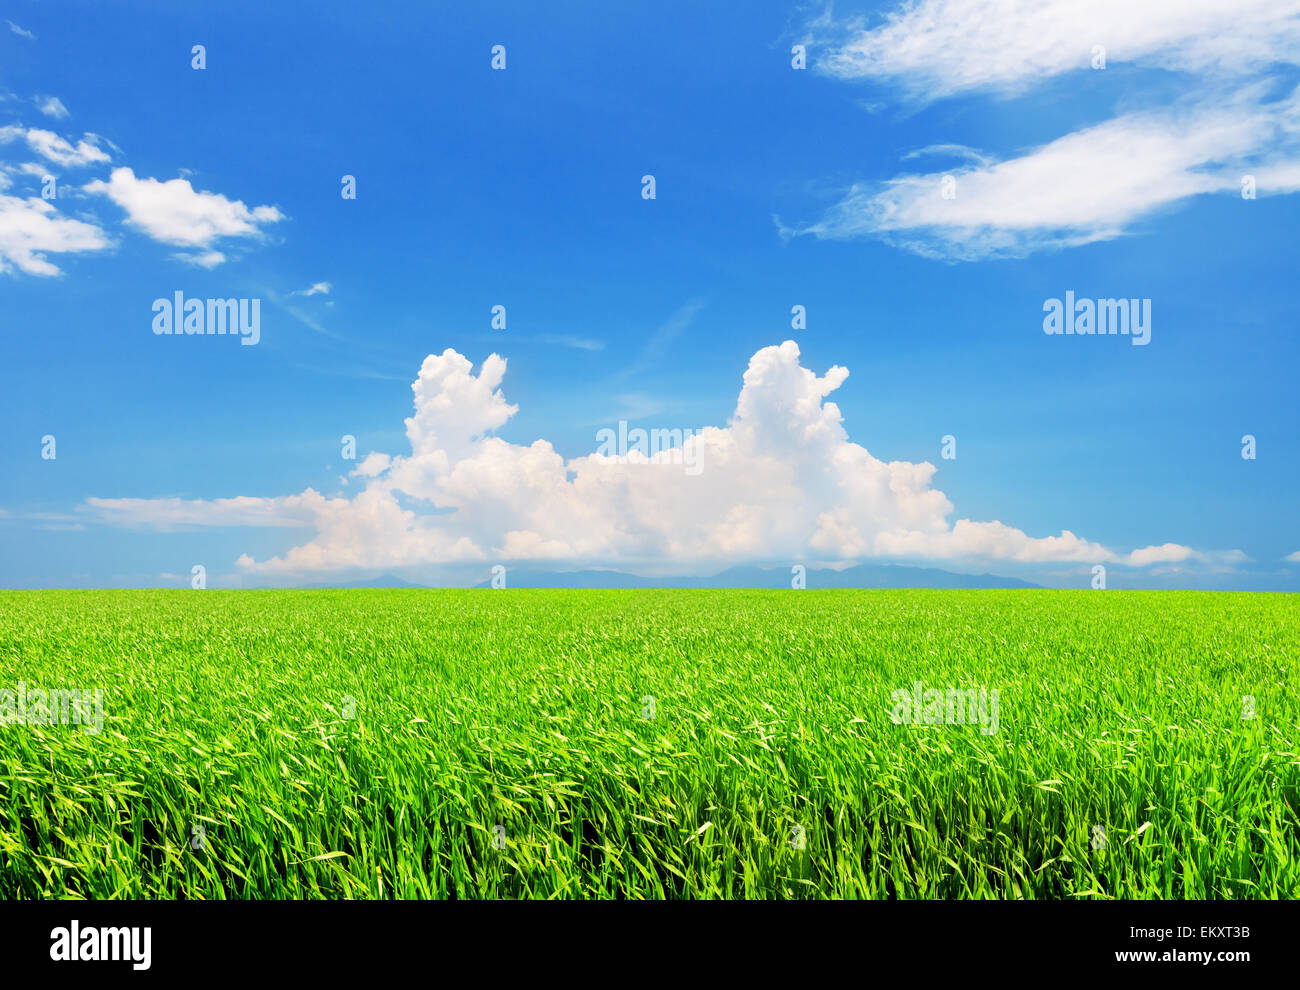 Green field and blue sky with white clouds Banque D'Images